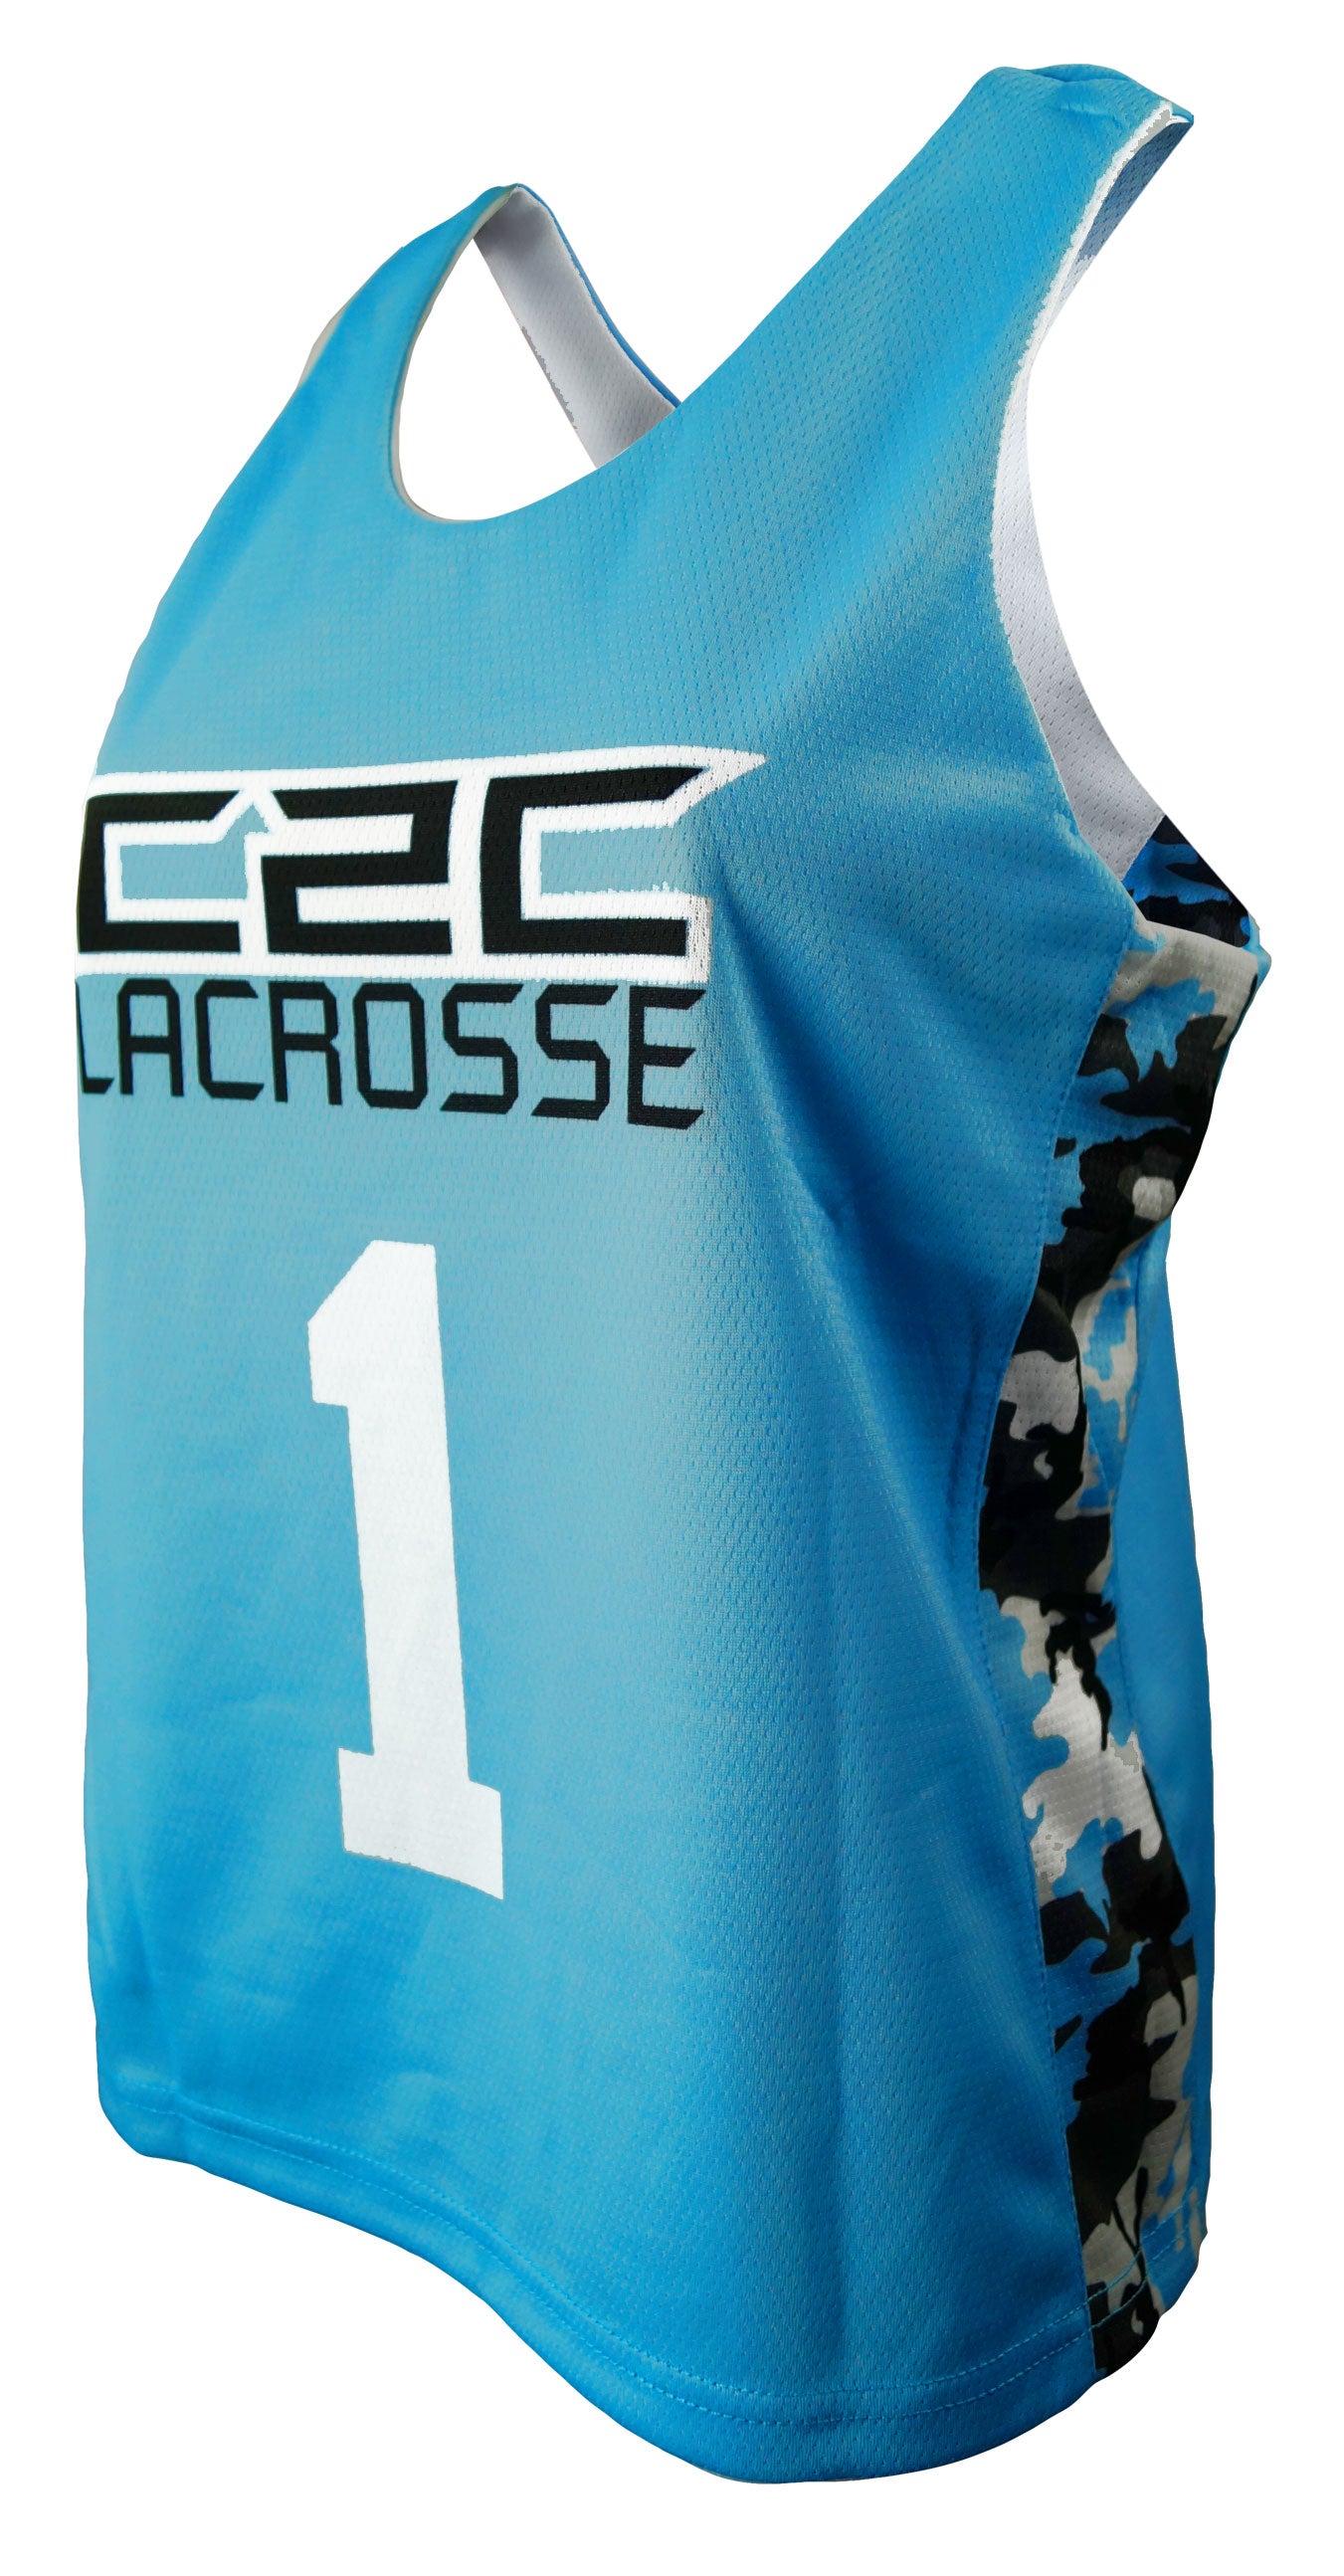 FULL SUBLIMATION REVERSIBLE BASKETBALL JERSEY, Products